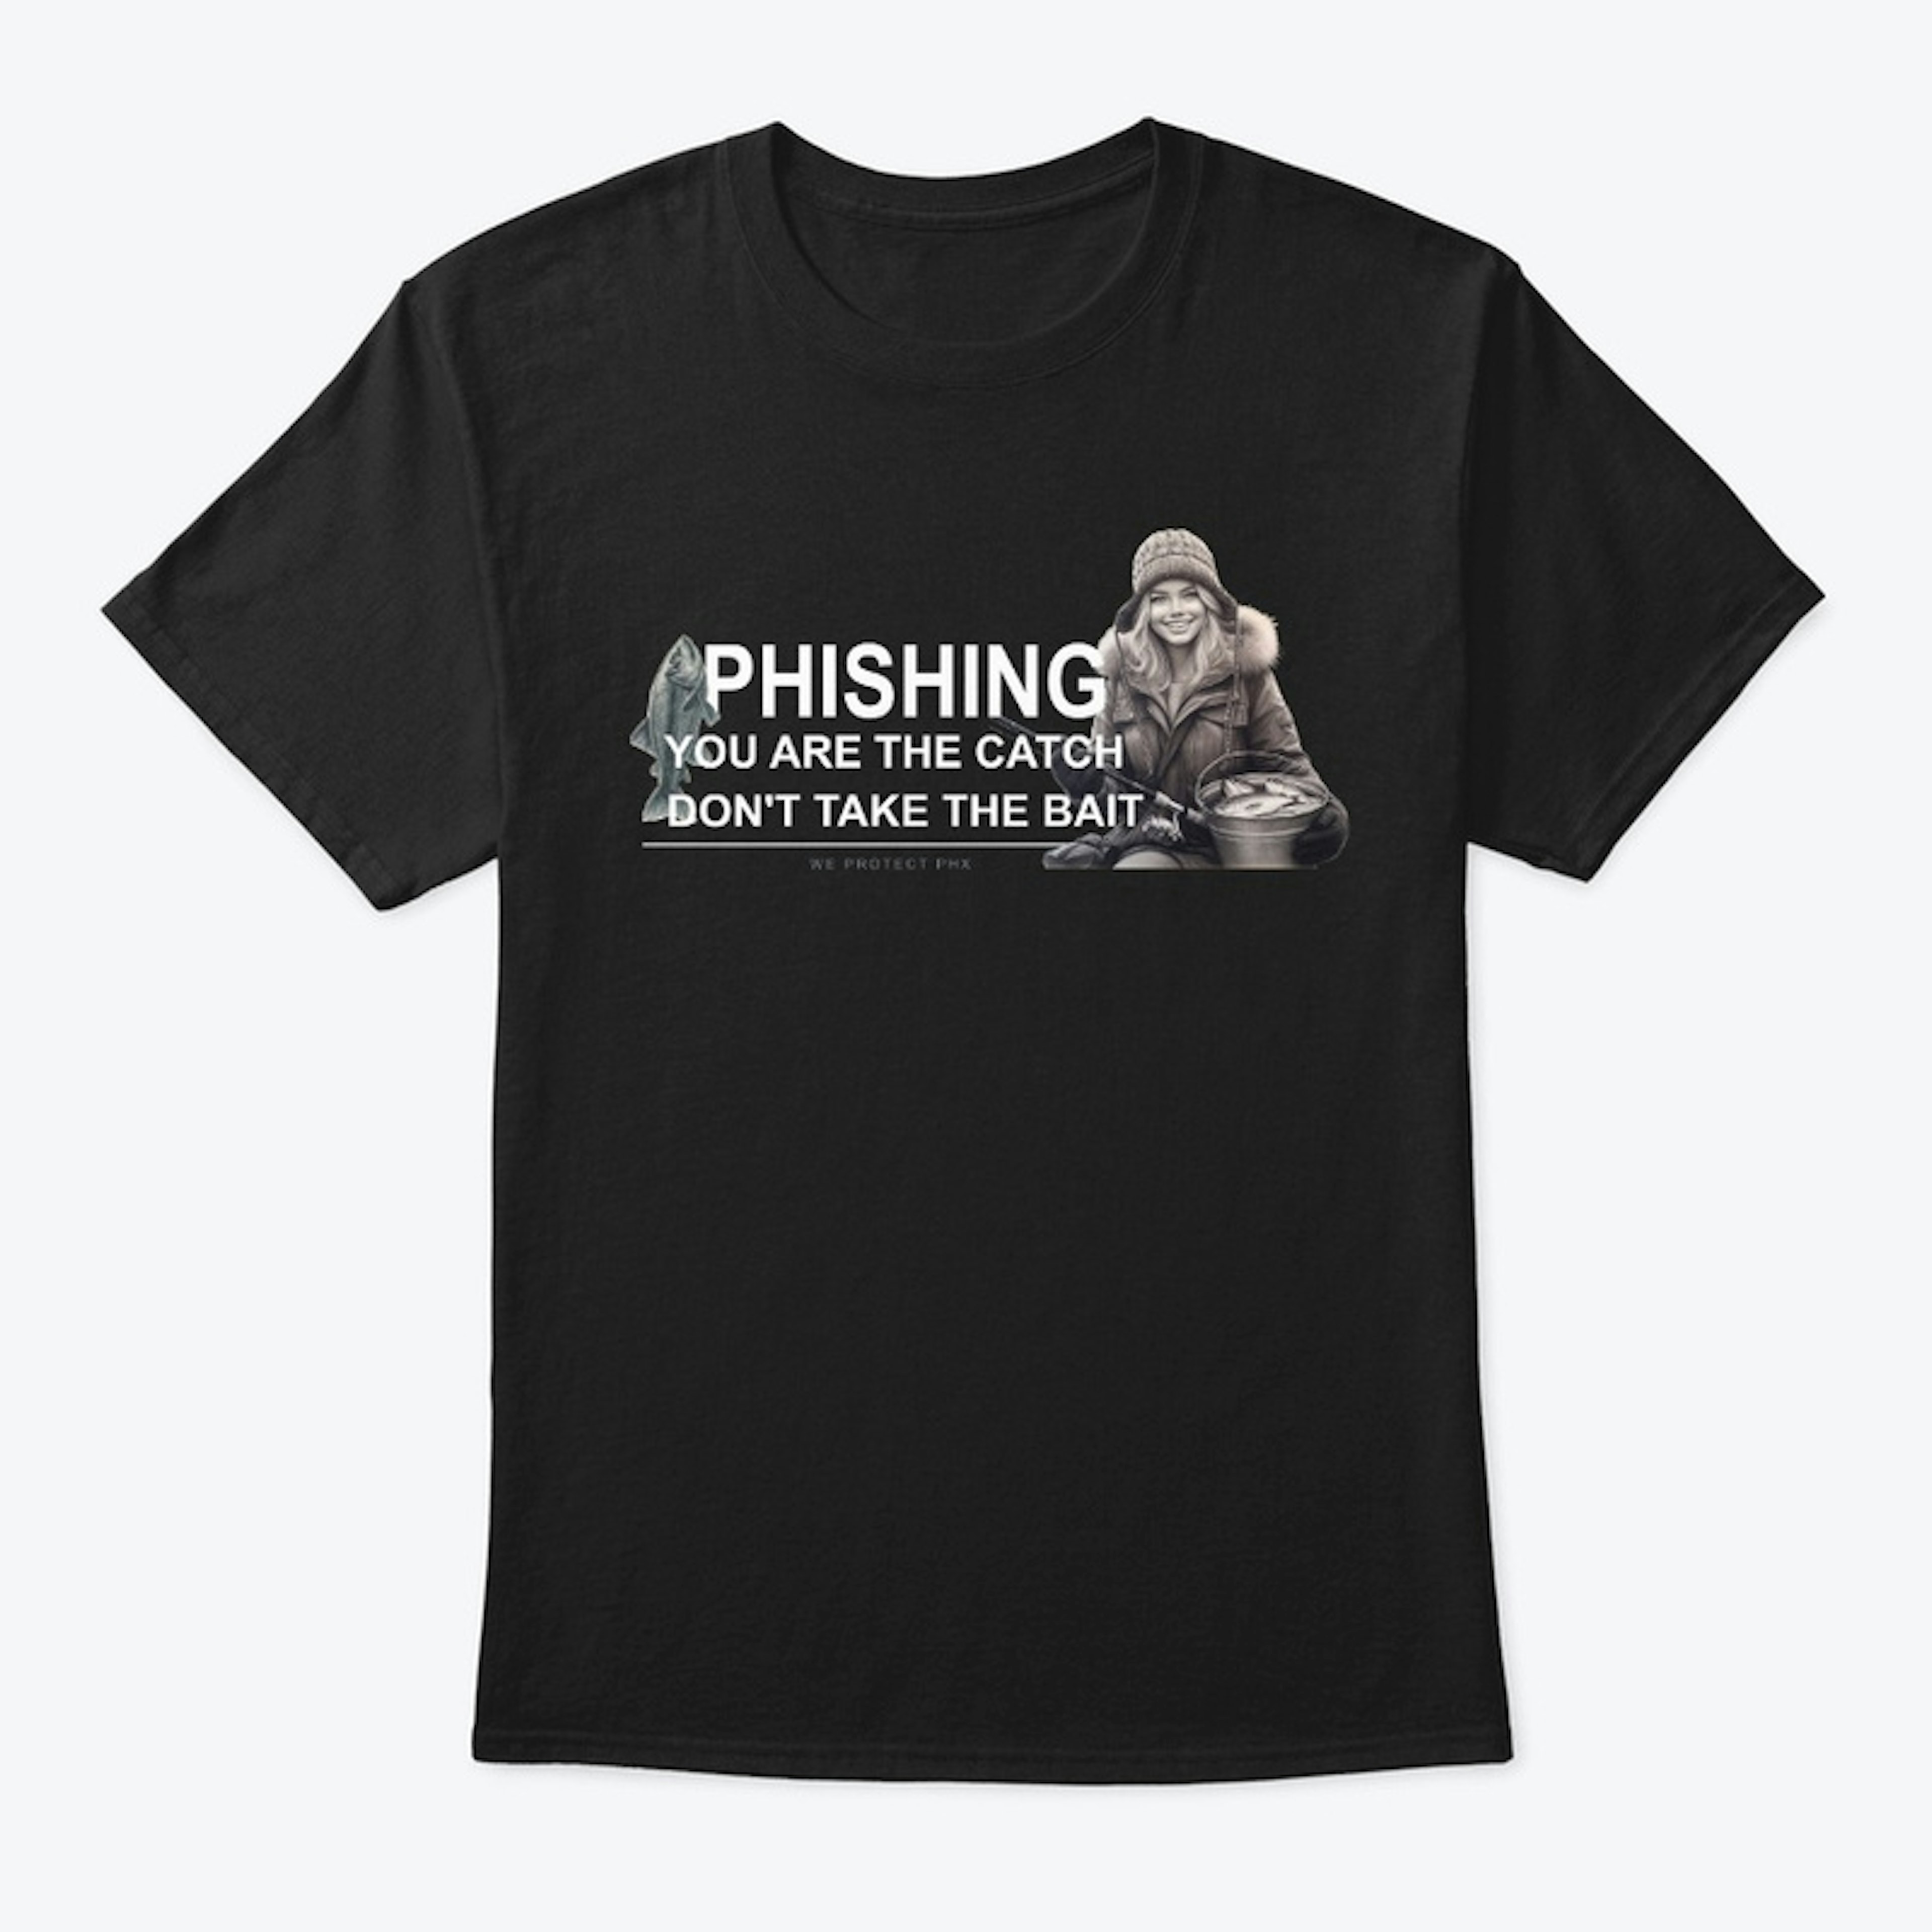 Phishing-You are the catch